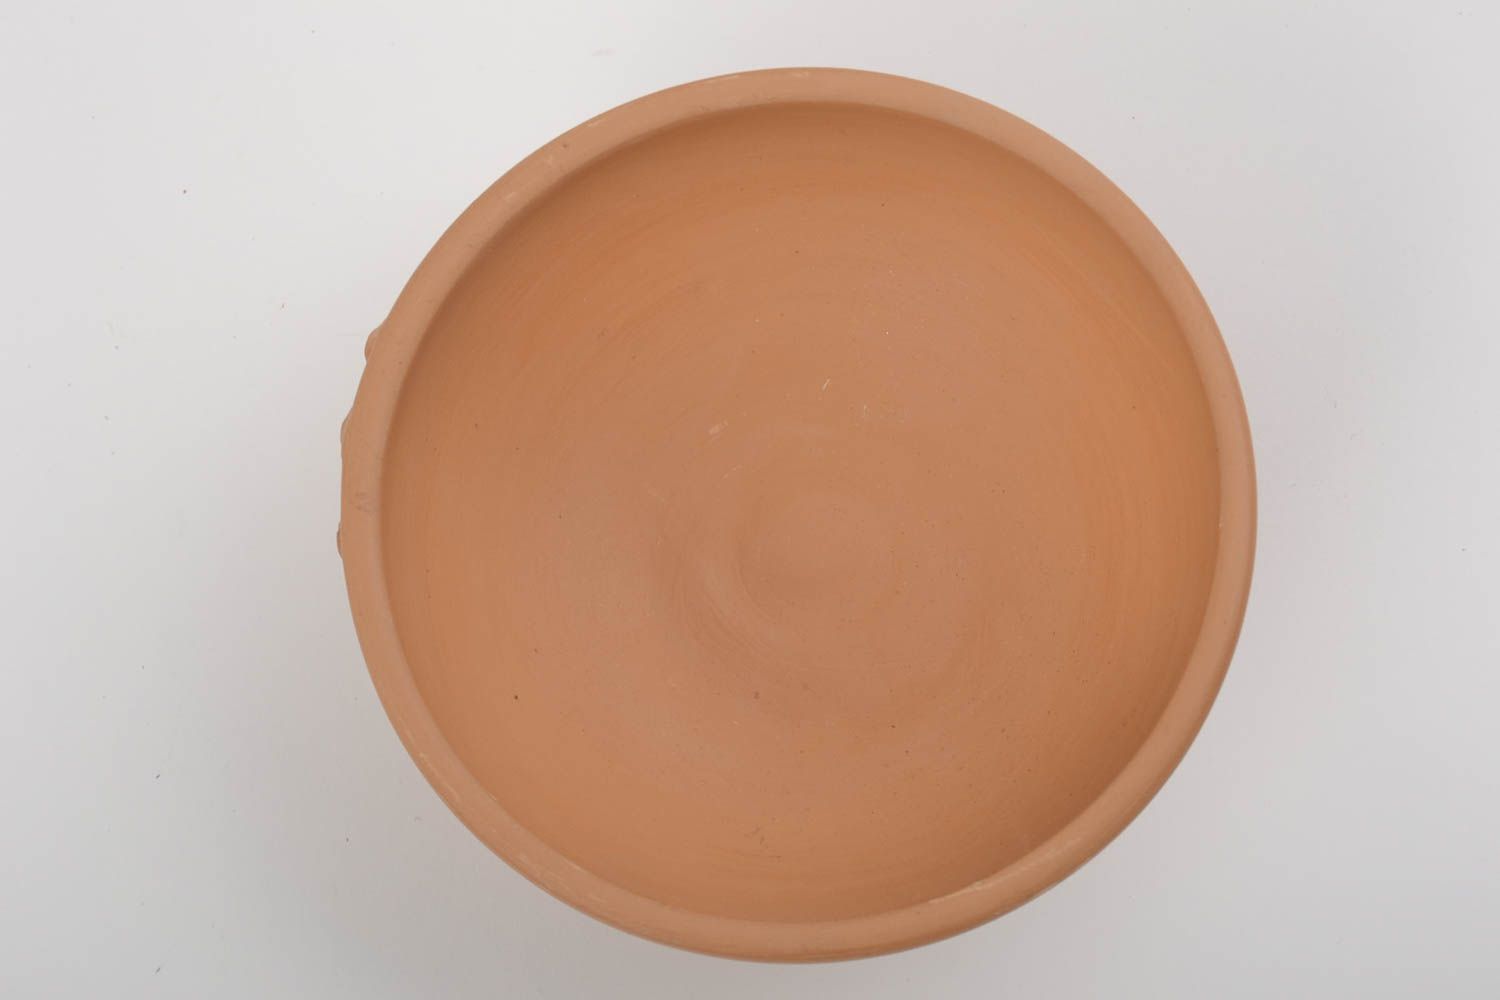 3-inch ceramic soup bowl with molded sunflower pattern in light terracotta color 1lb photo 4